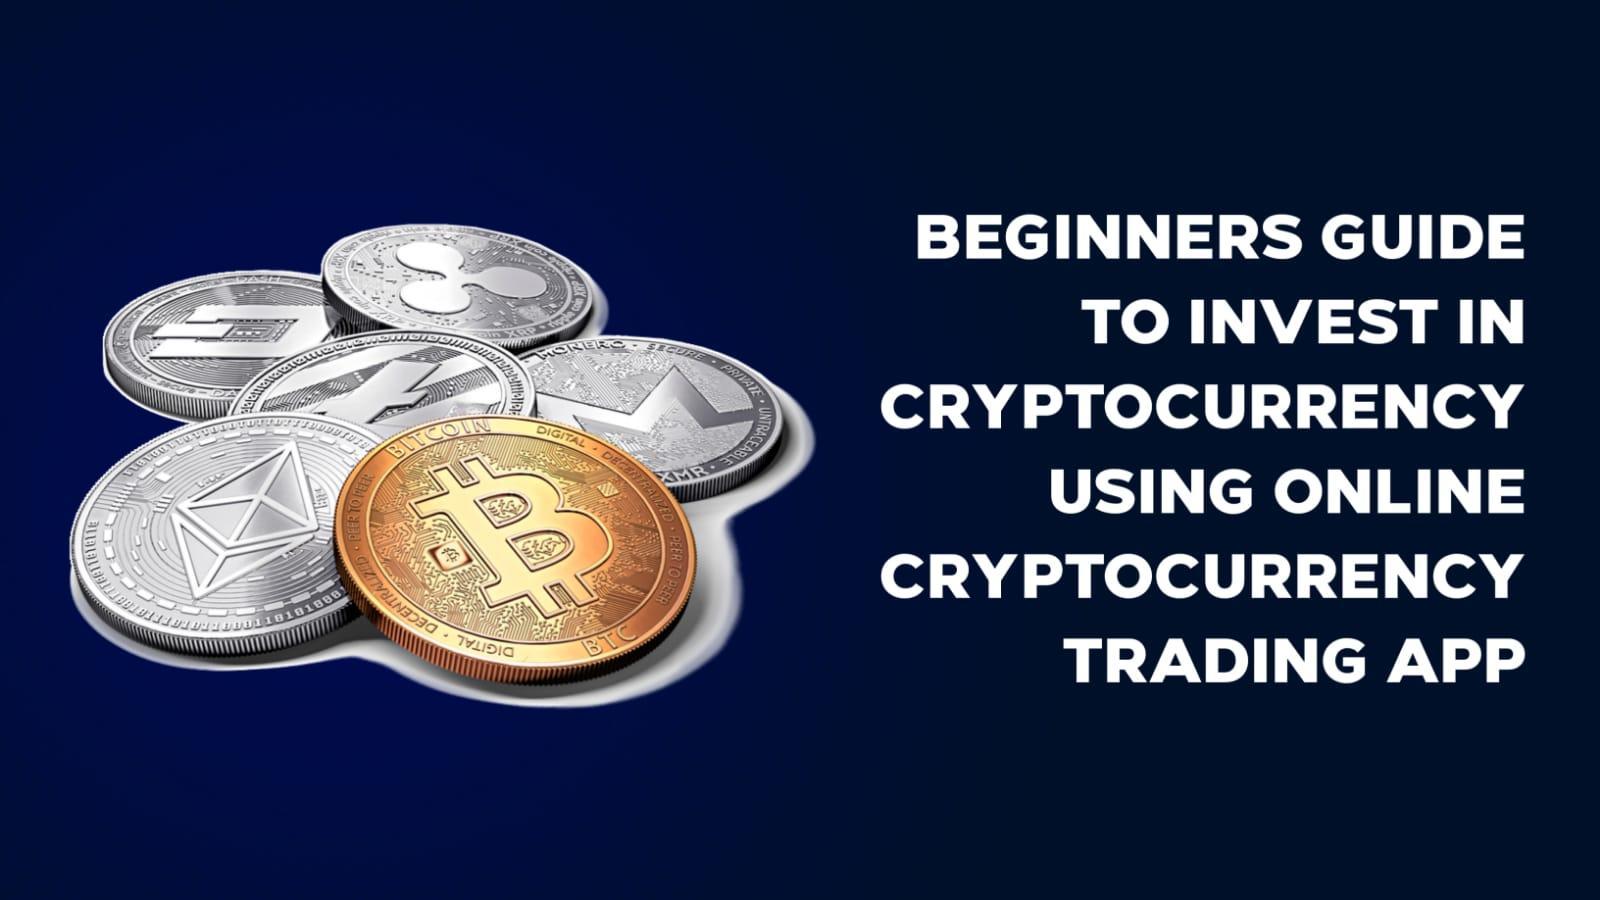 Beginners Guide to Invest in Cryptocurrency Using Online Cryptocurrency Trading App